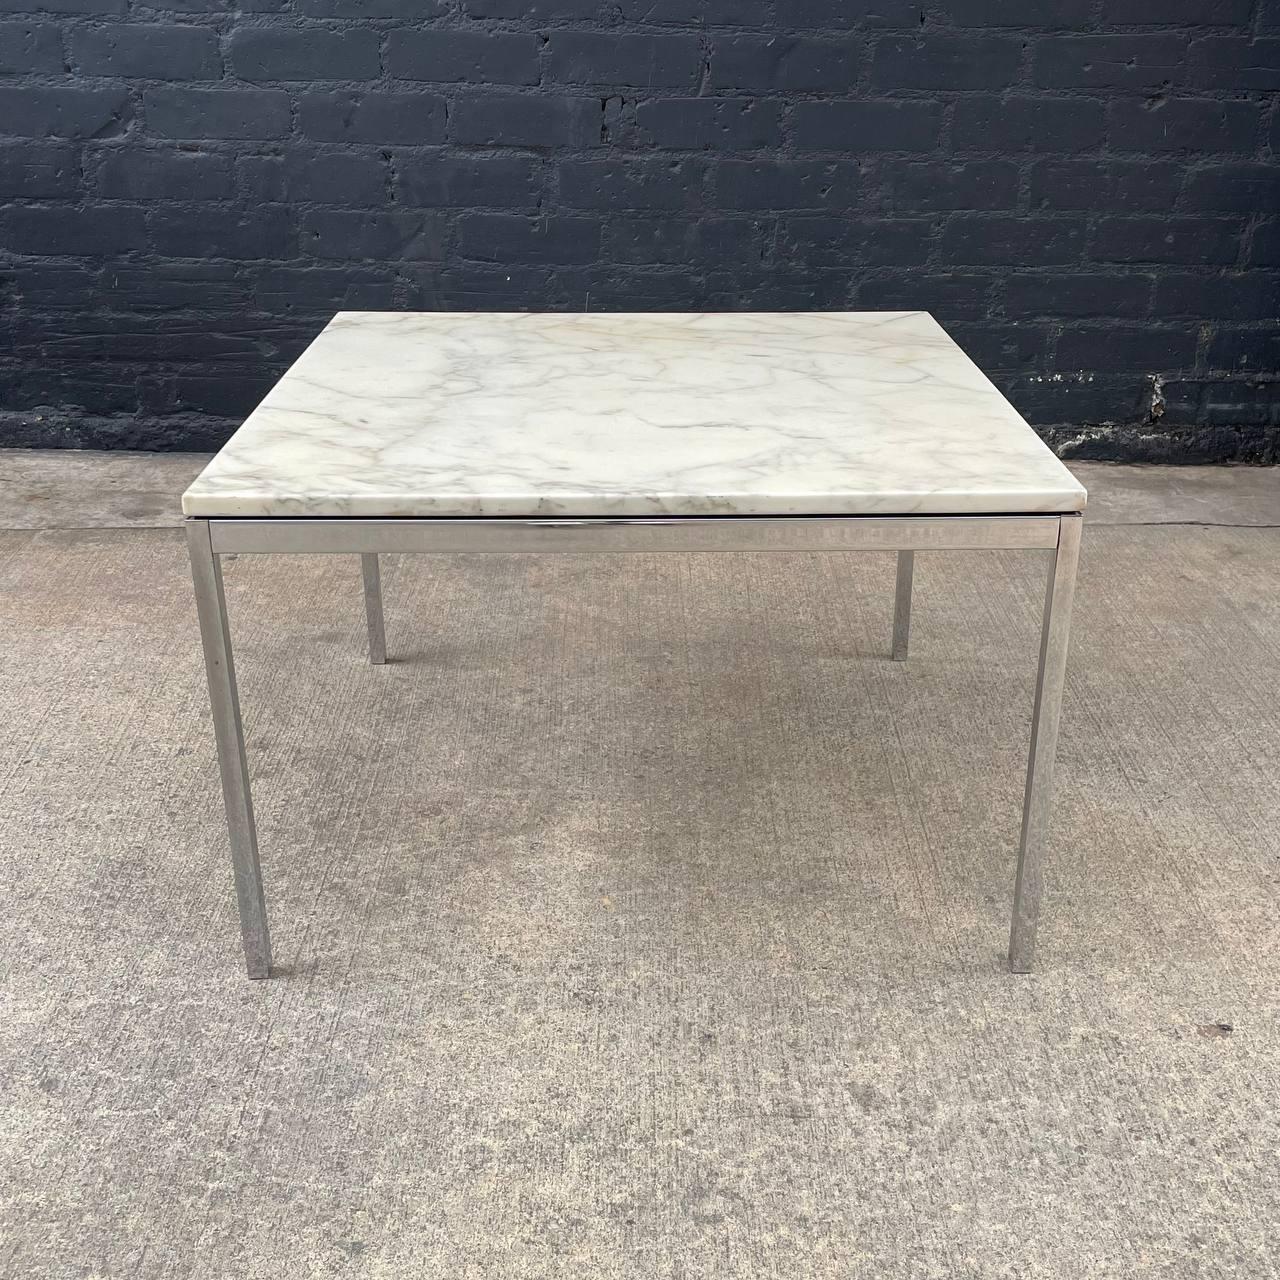 Signed Original Mid-Century Modern Carrara Marble Coffee Table by Knoll In Good Condition For Sale In Los Angeles, CA